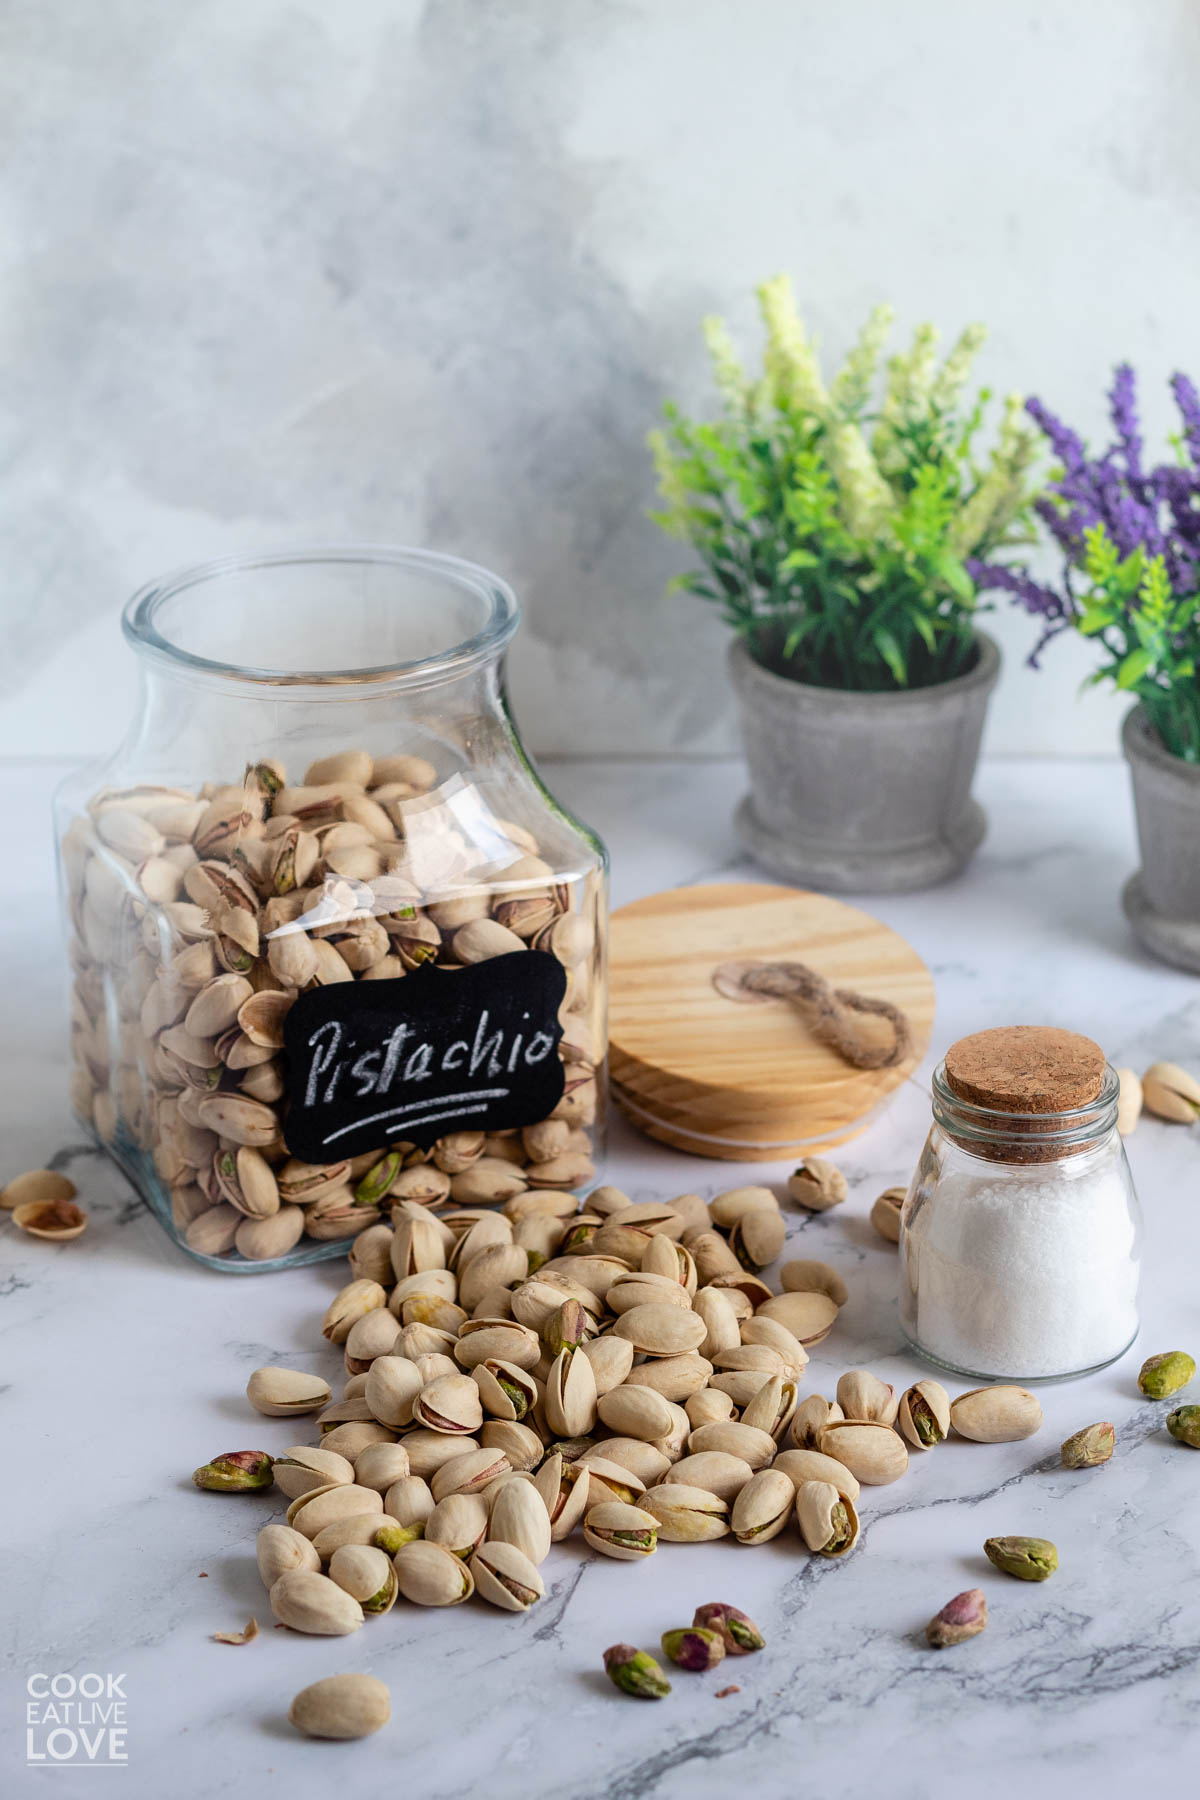 Ingredients needed to make pistachio butter.